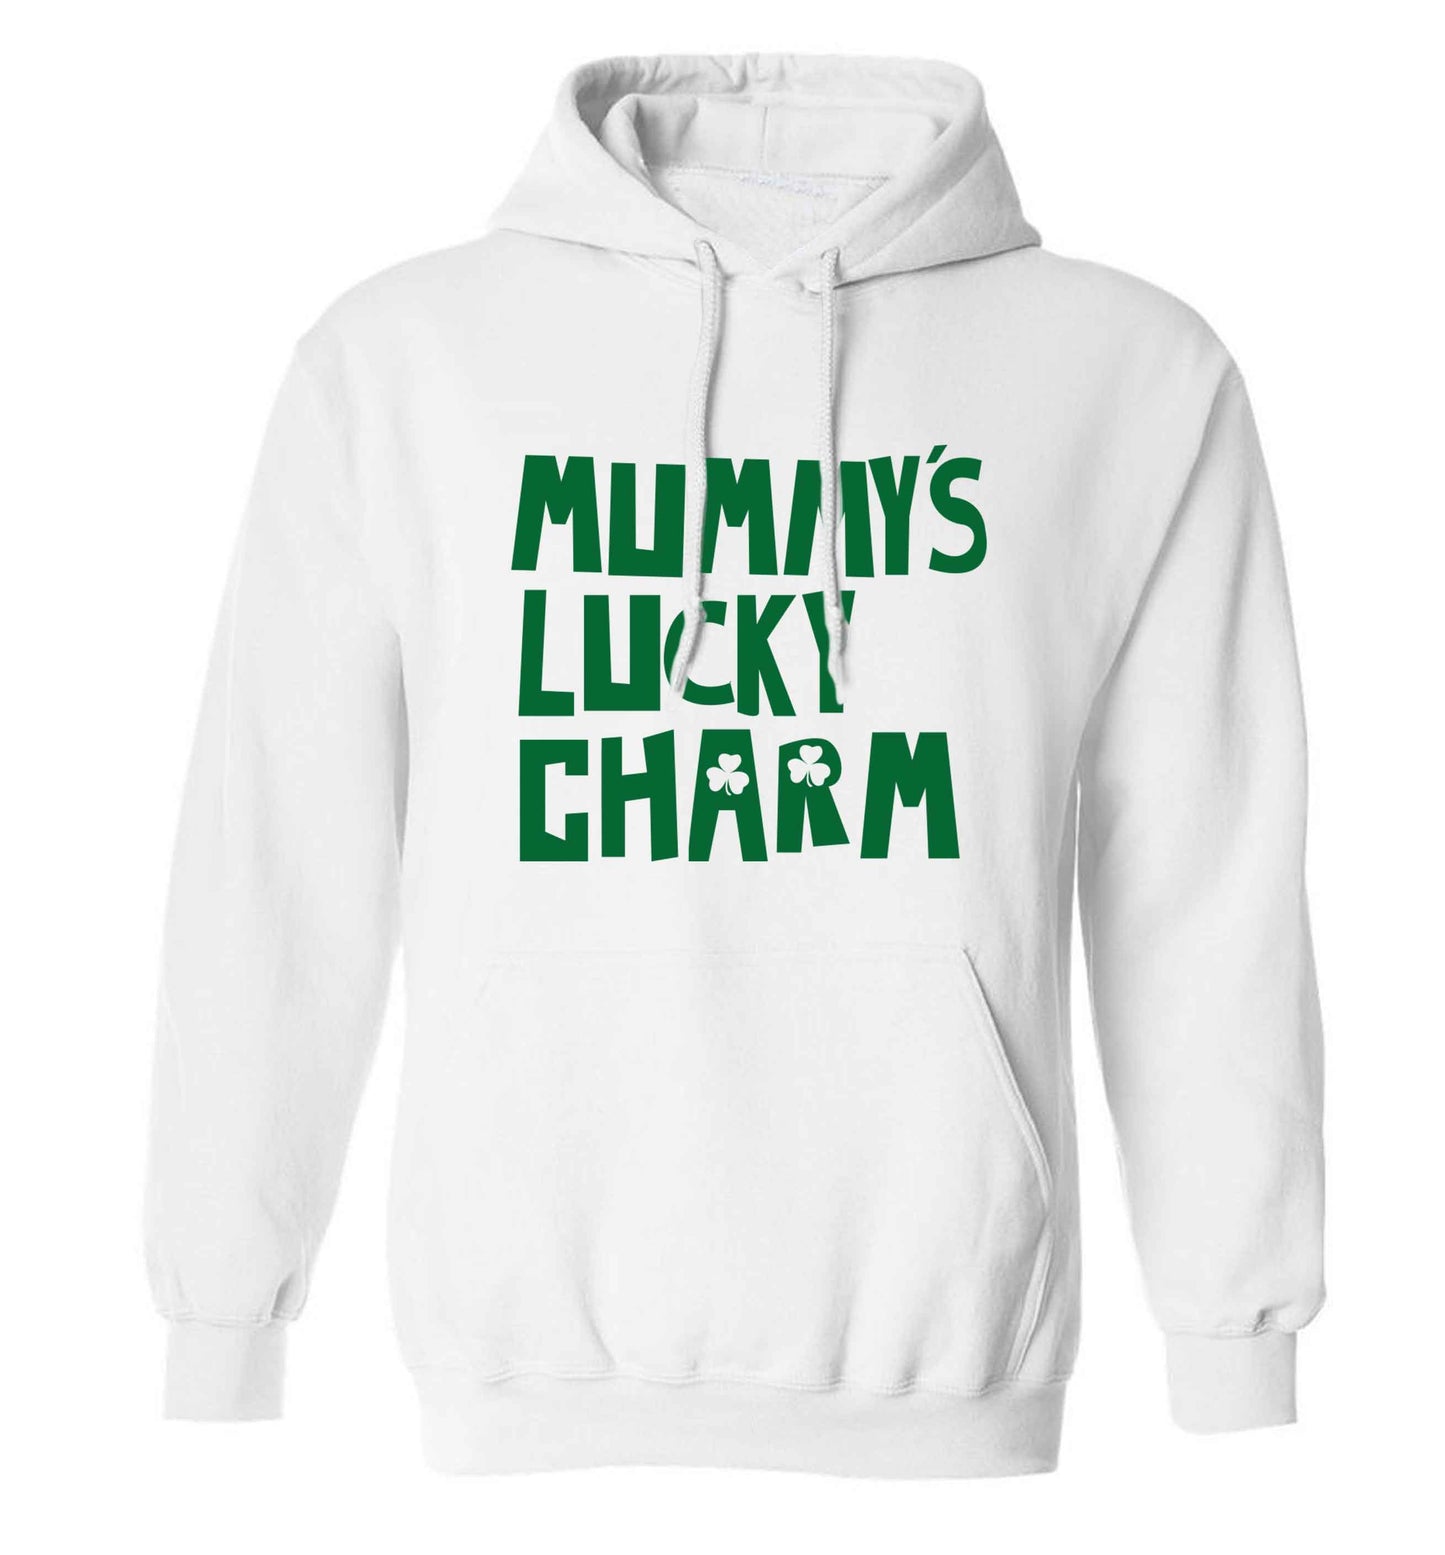 Mummy's lucky charm adults unisex white hoodie 2XL